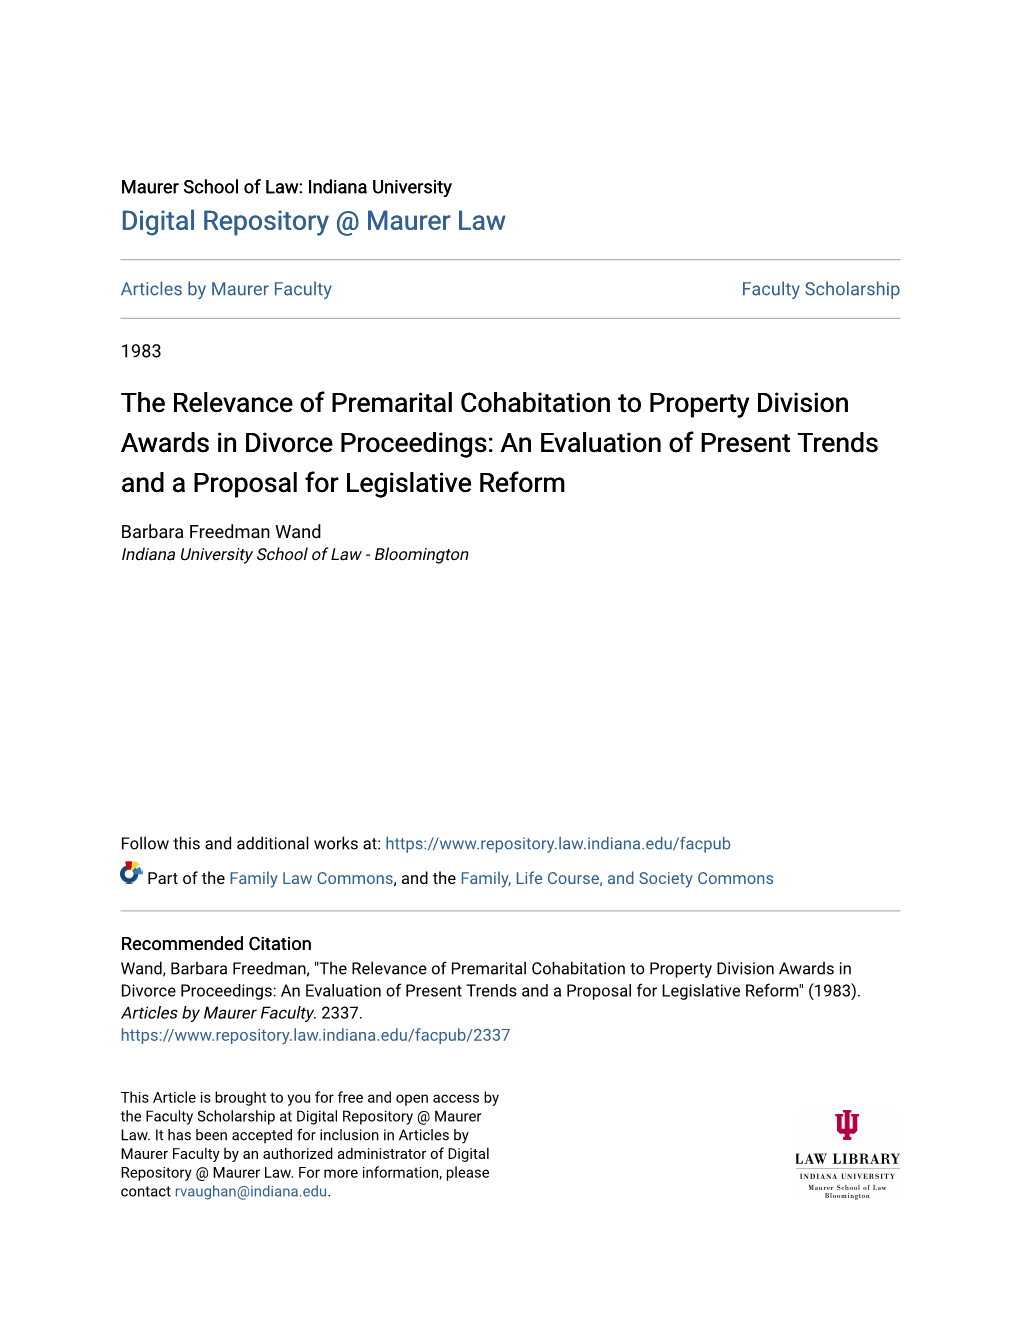 The Relevance of Premarital Cohabitation to Property Division Awards in Divorce Proceedings: an Evaluation of Present Trends and a Proposal for Legislative Reform